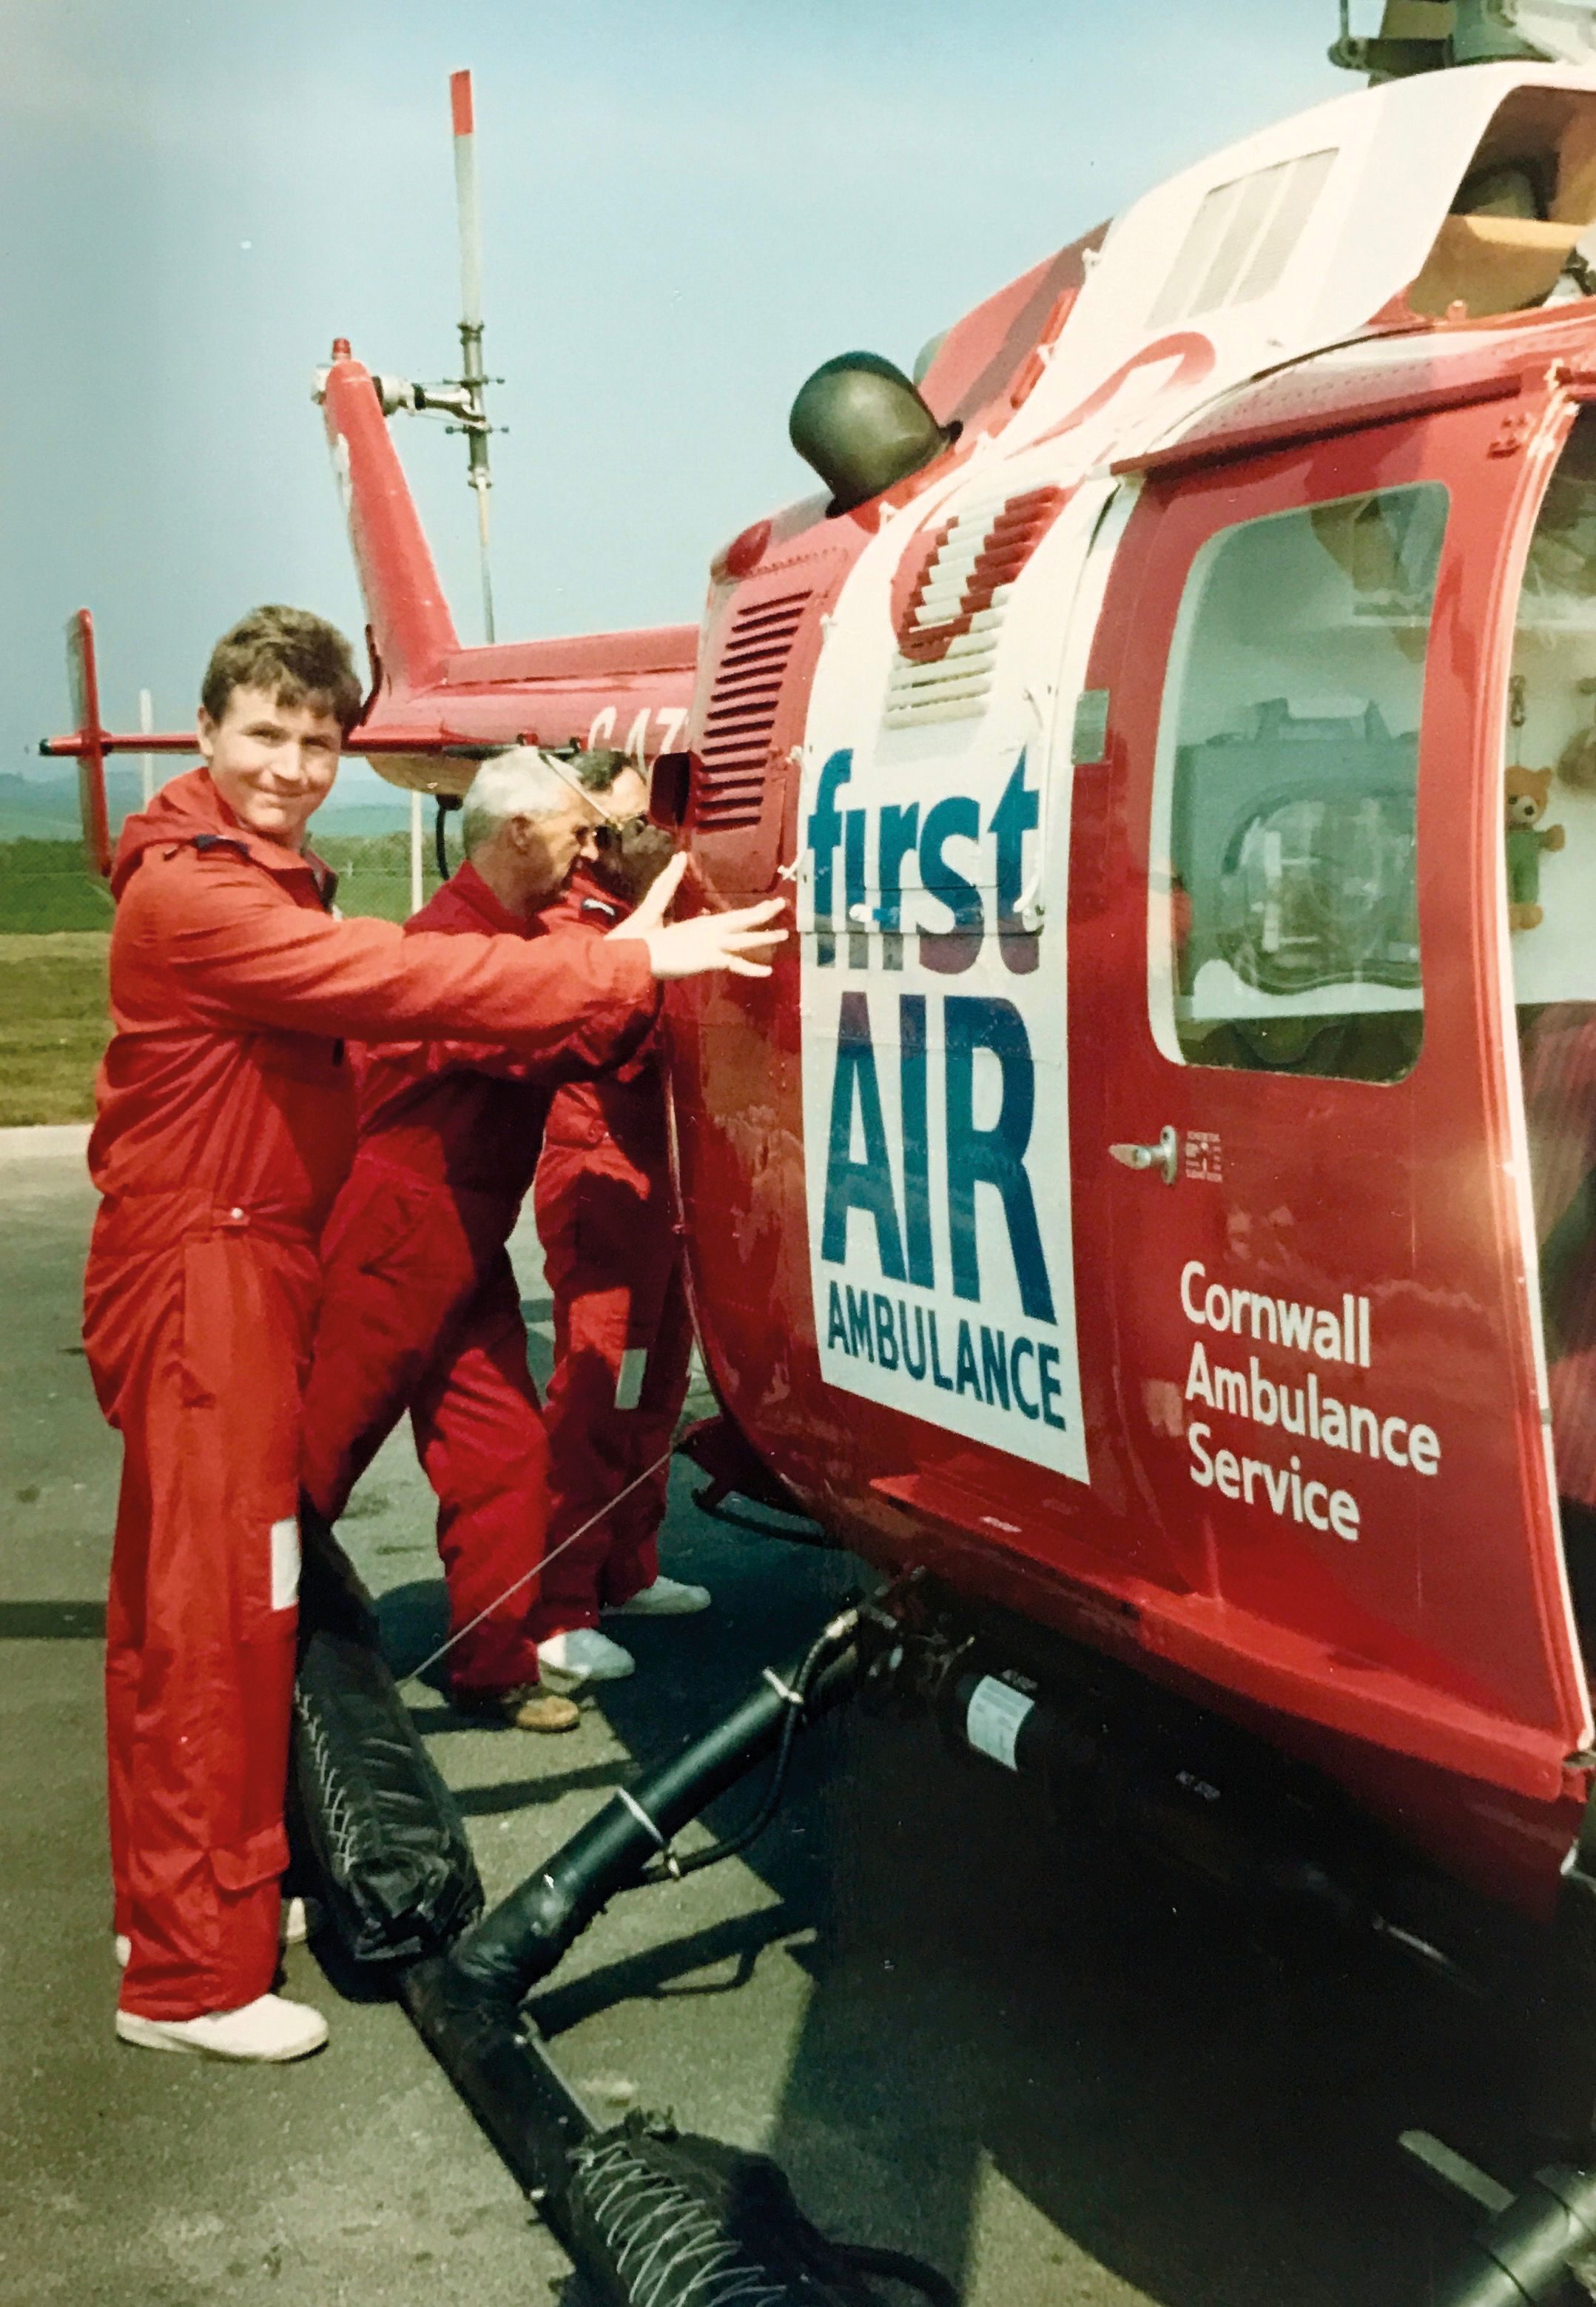 Crew members of the first air ambulance